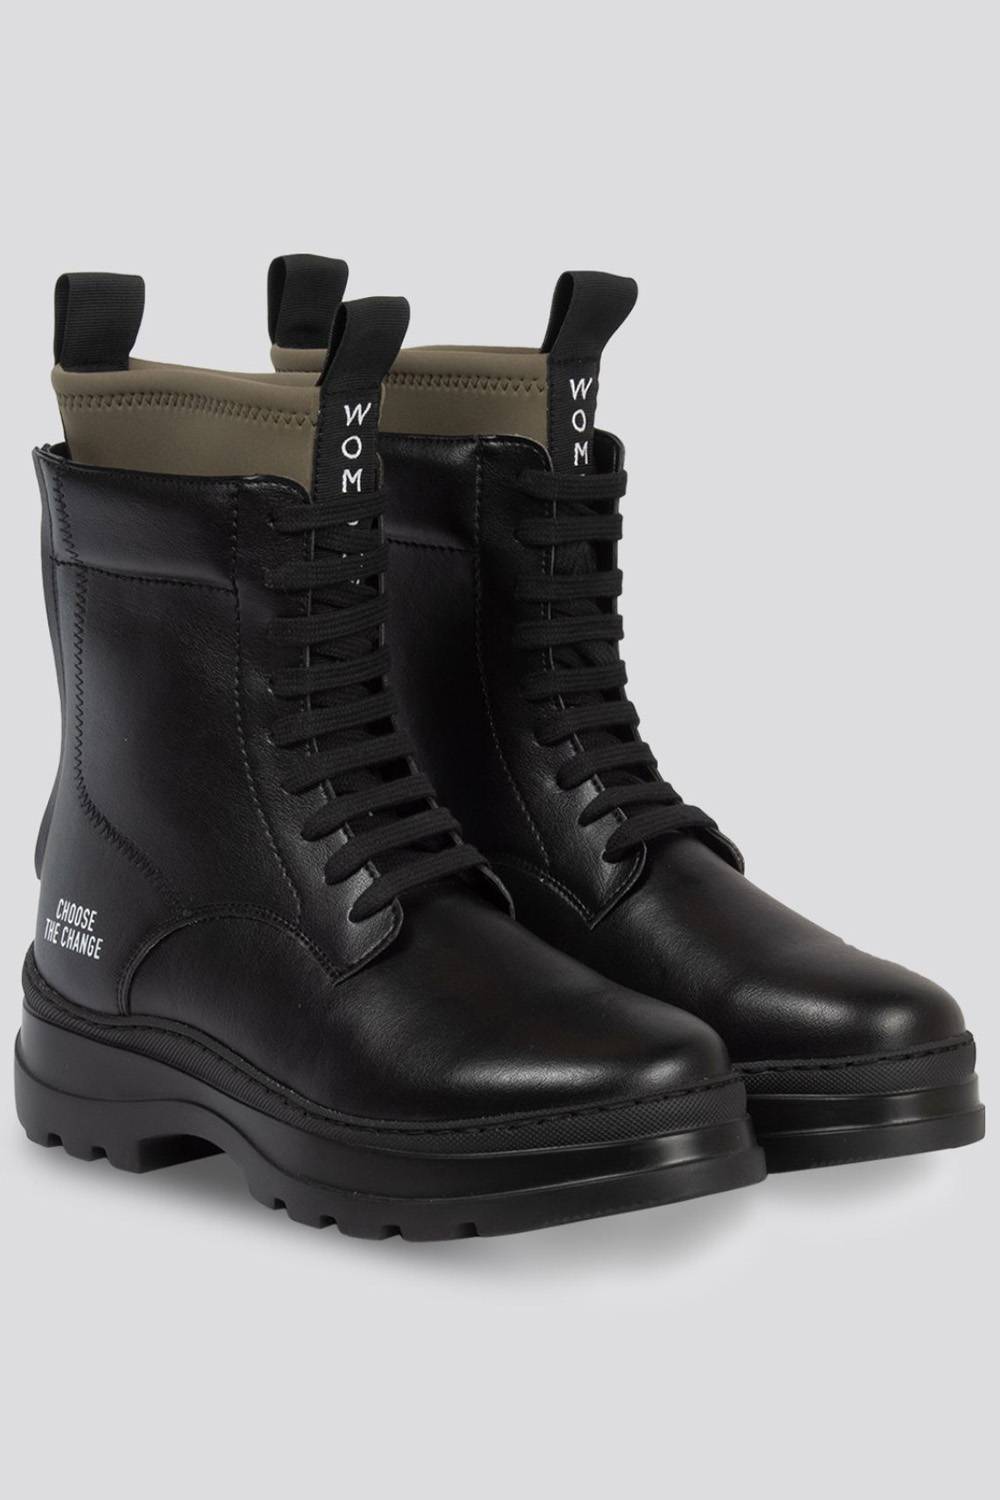 womsh vegan safety work boots